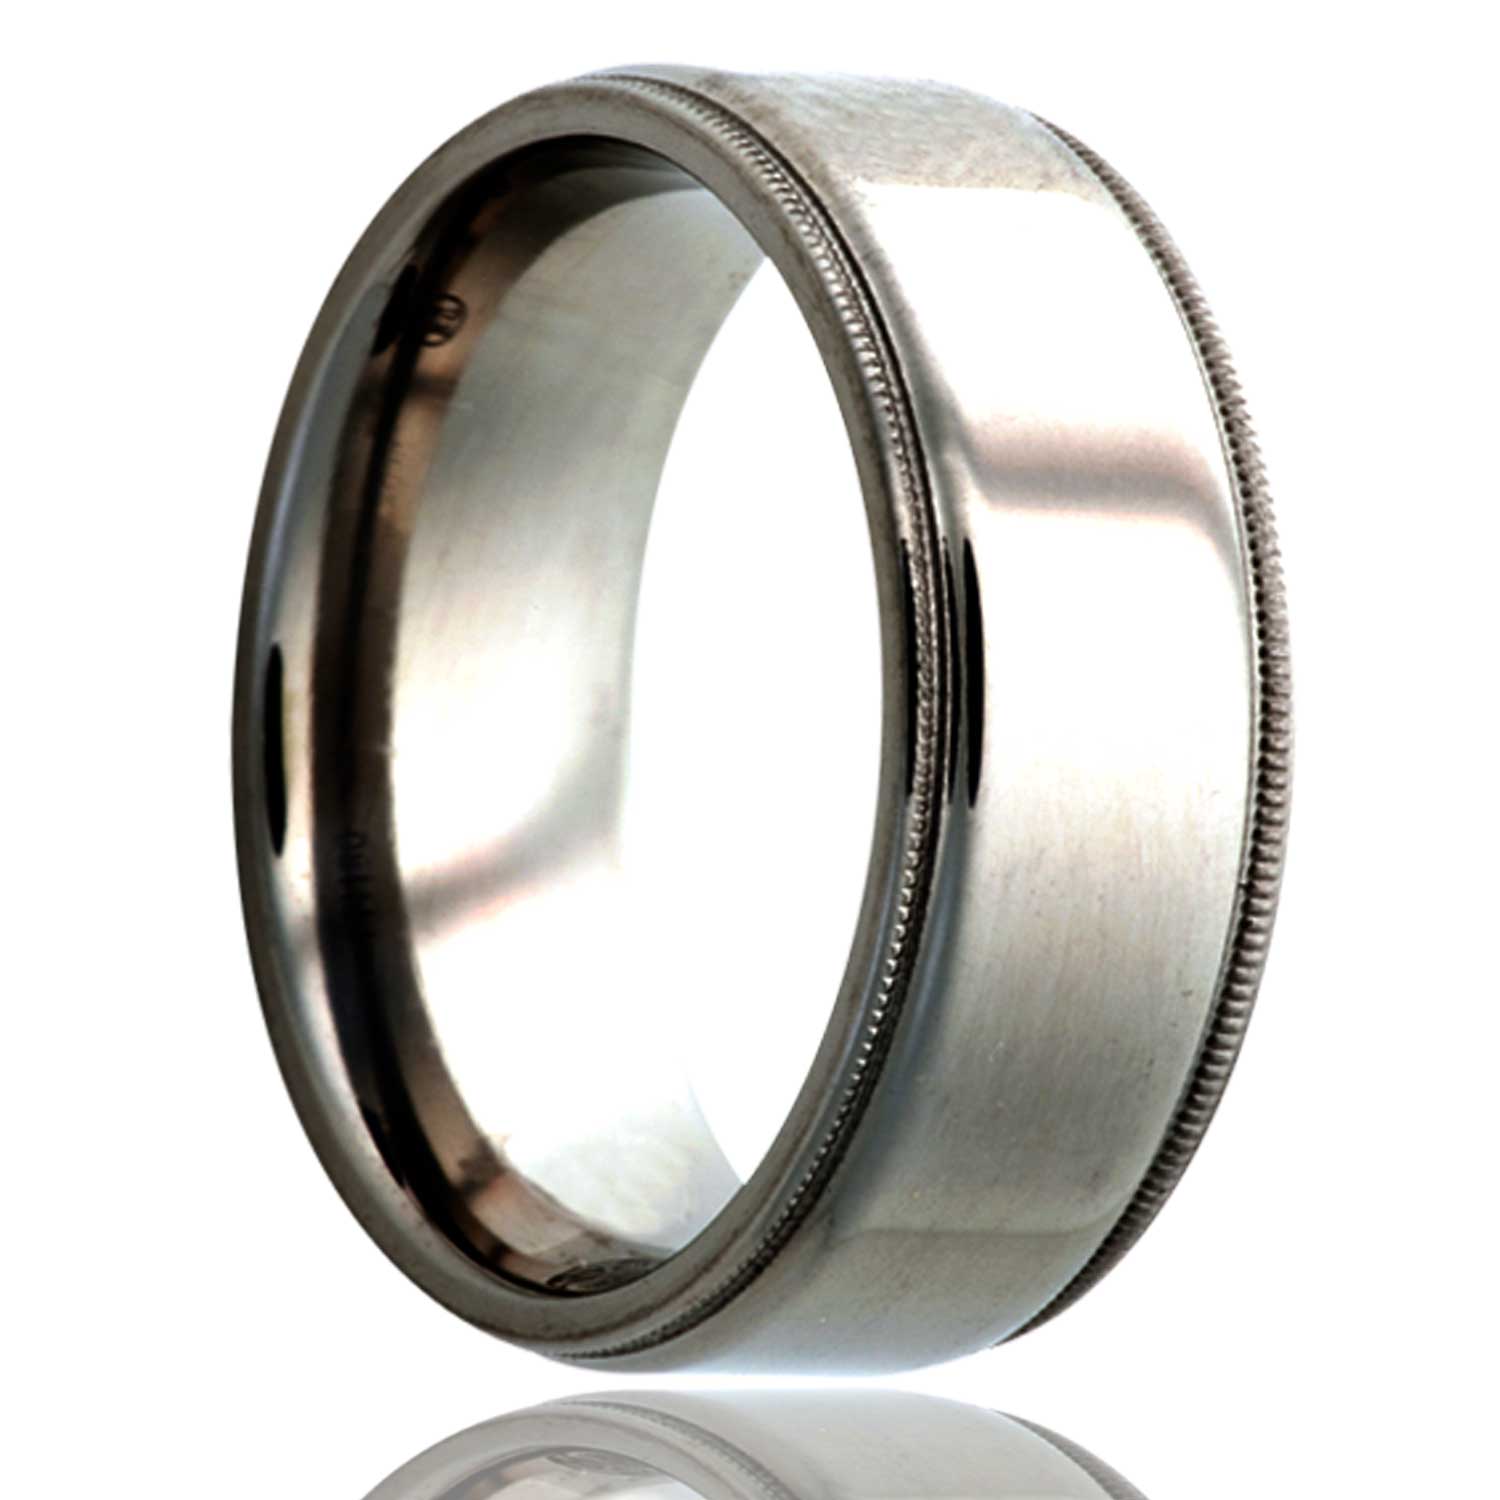 A titanium wedding band with stepped edges displayed on a neutral white background.